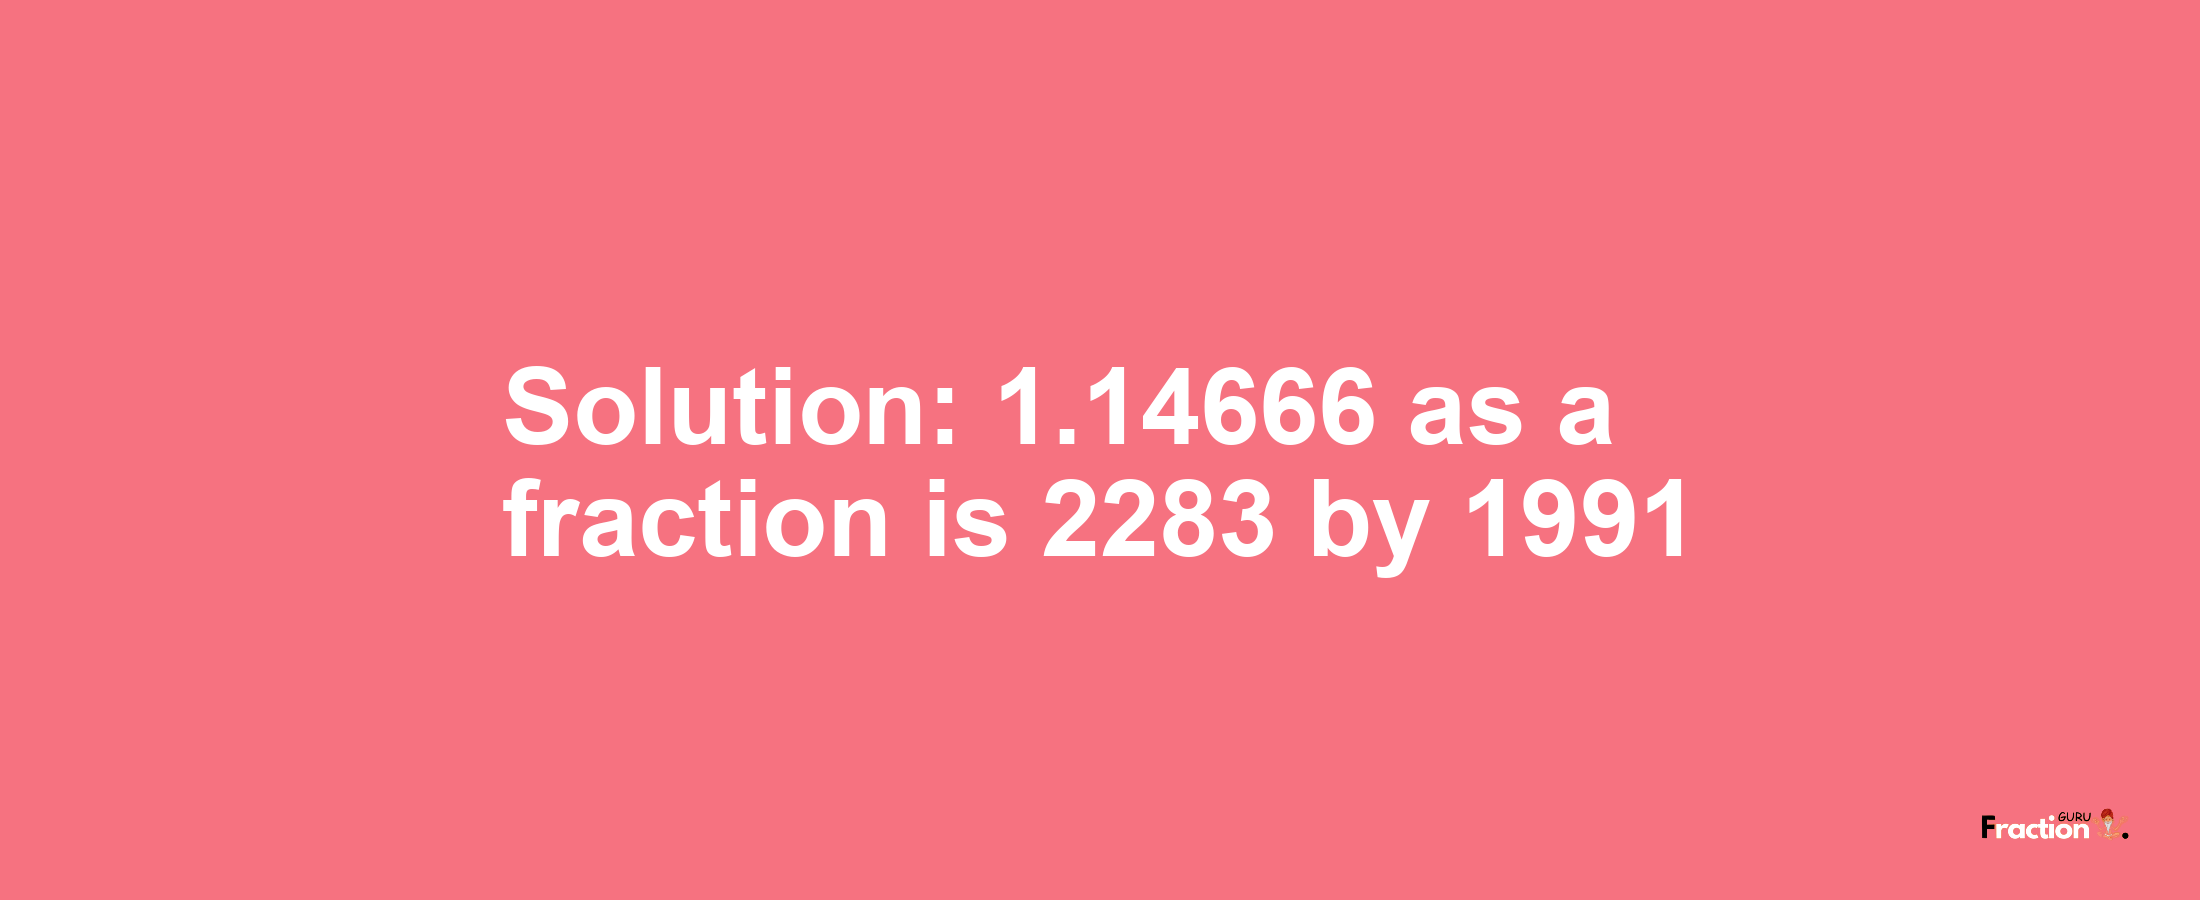 Solution:1.14666 as a fraction is 2283/1991